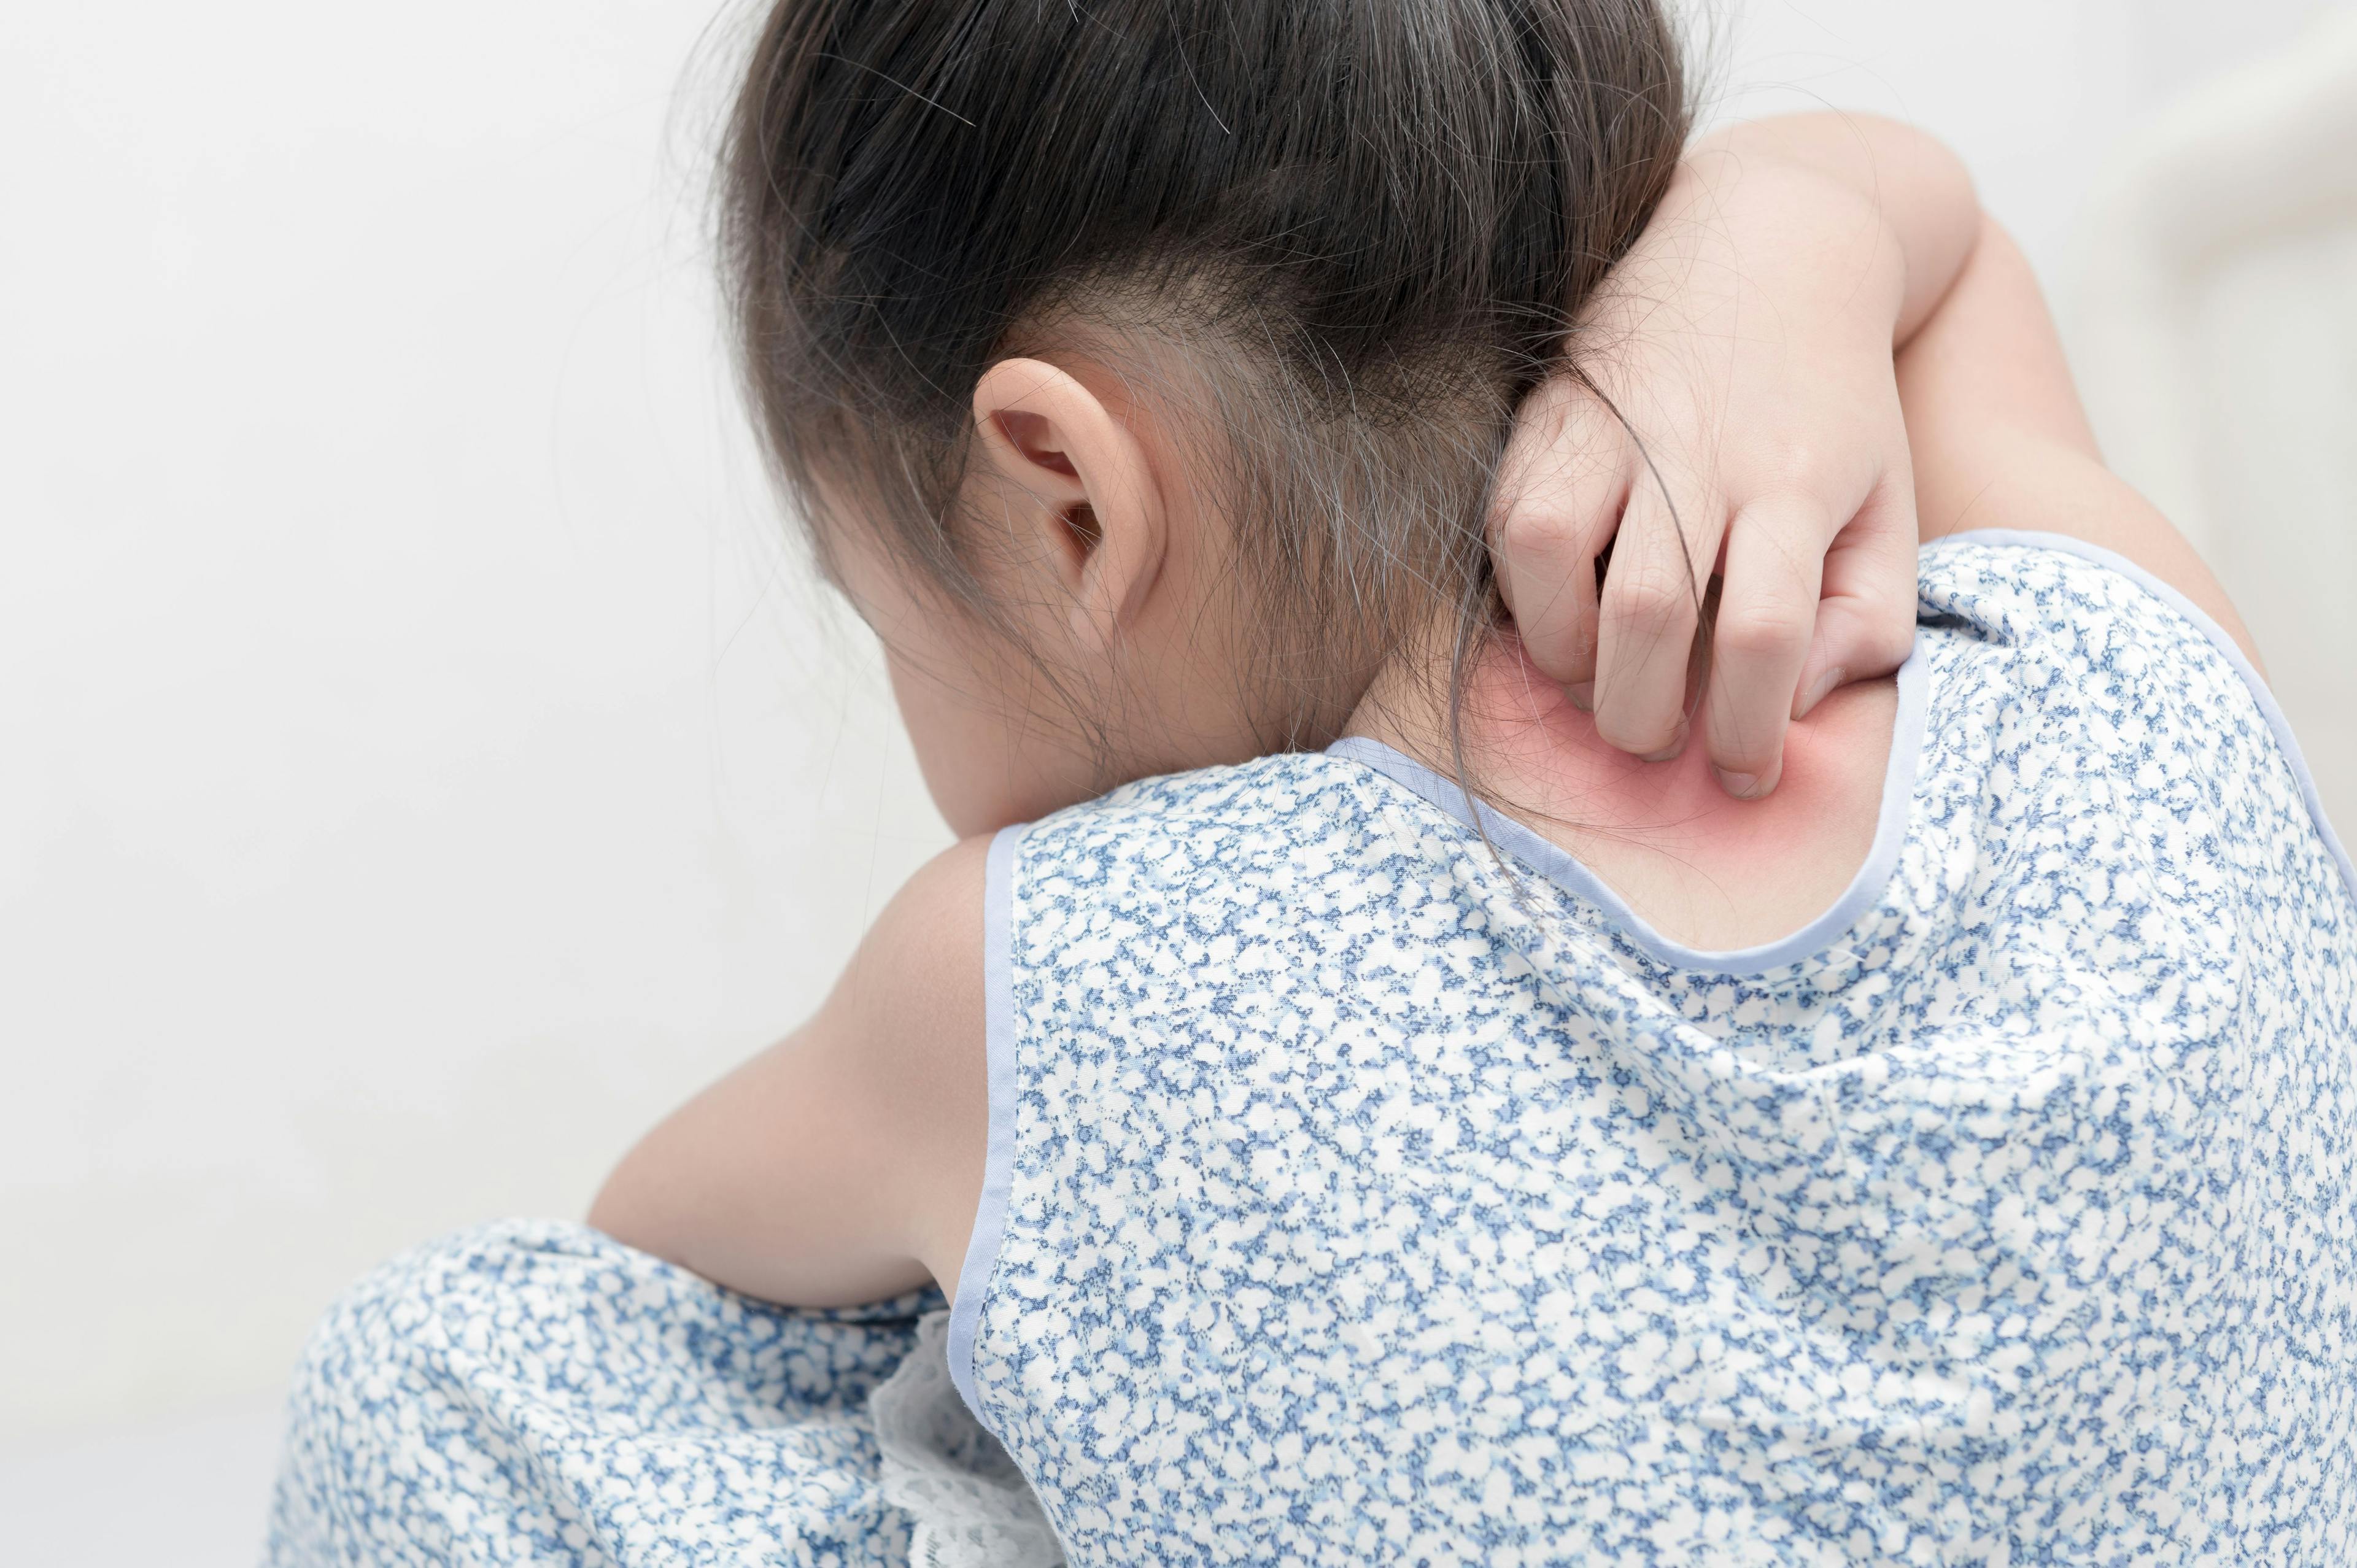 An Overview of Pediatric Psoriasis